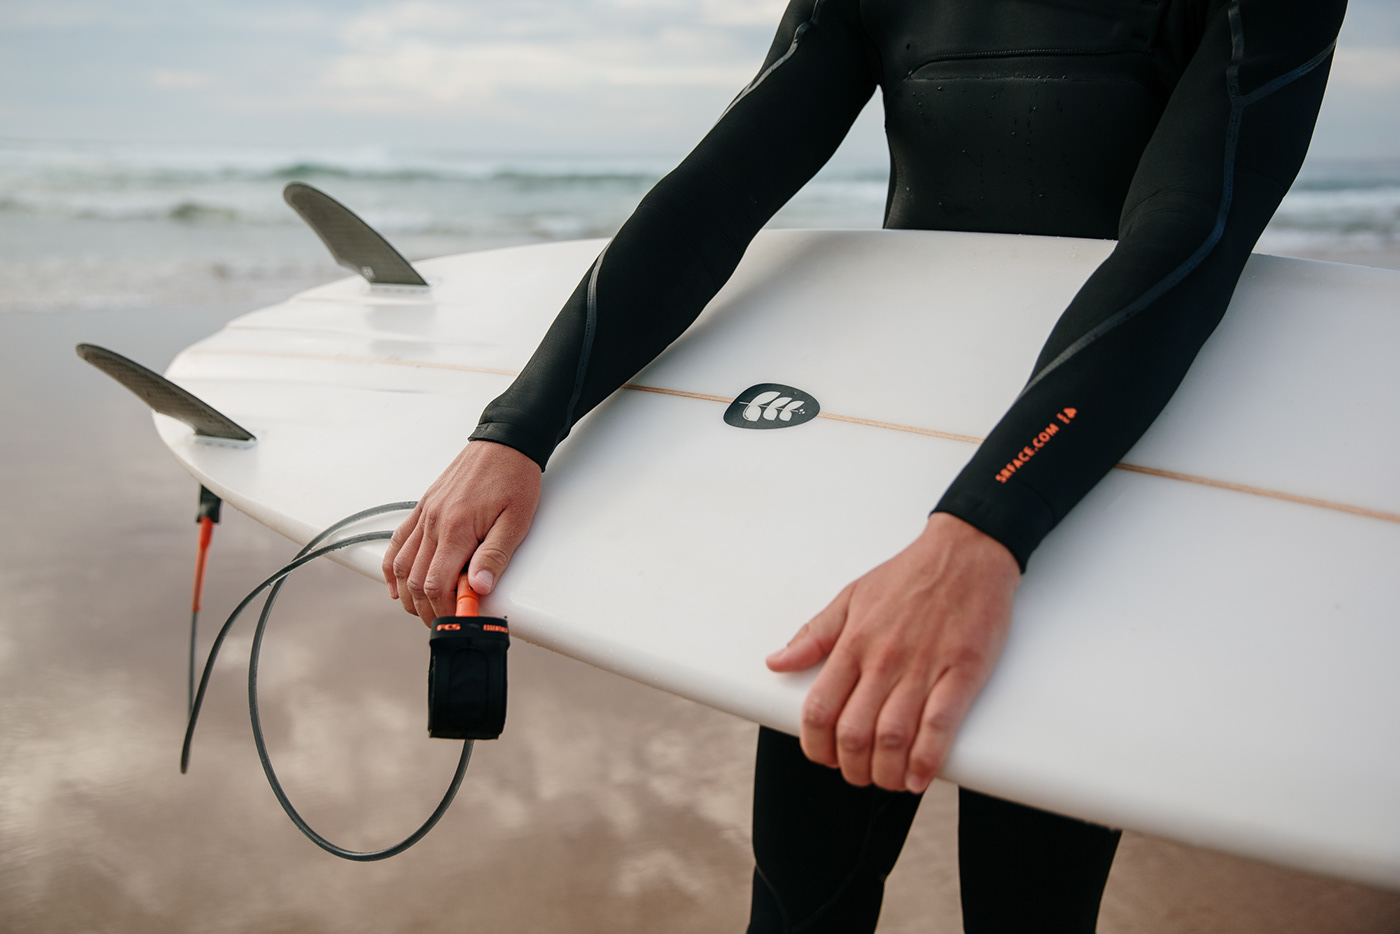 Surf surfing sports photography sports photoshoot beach Portugal Ocean wetsuit